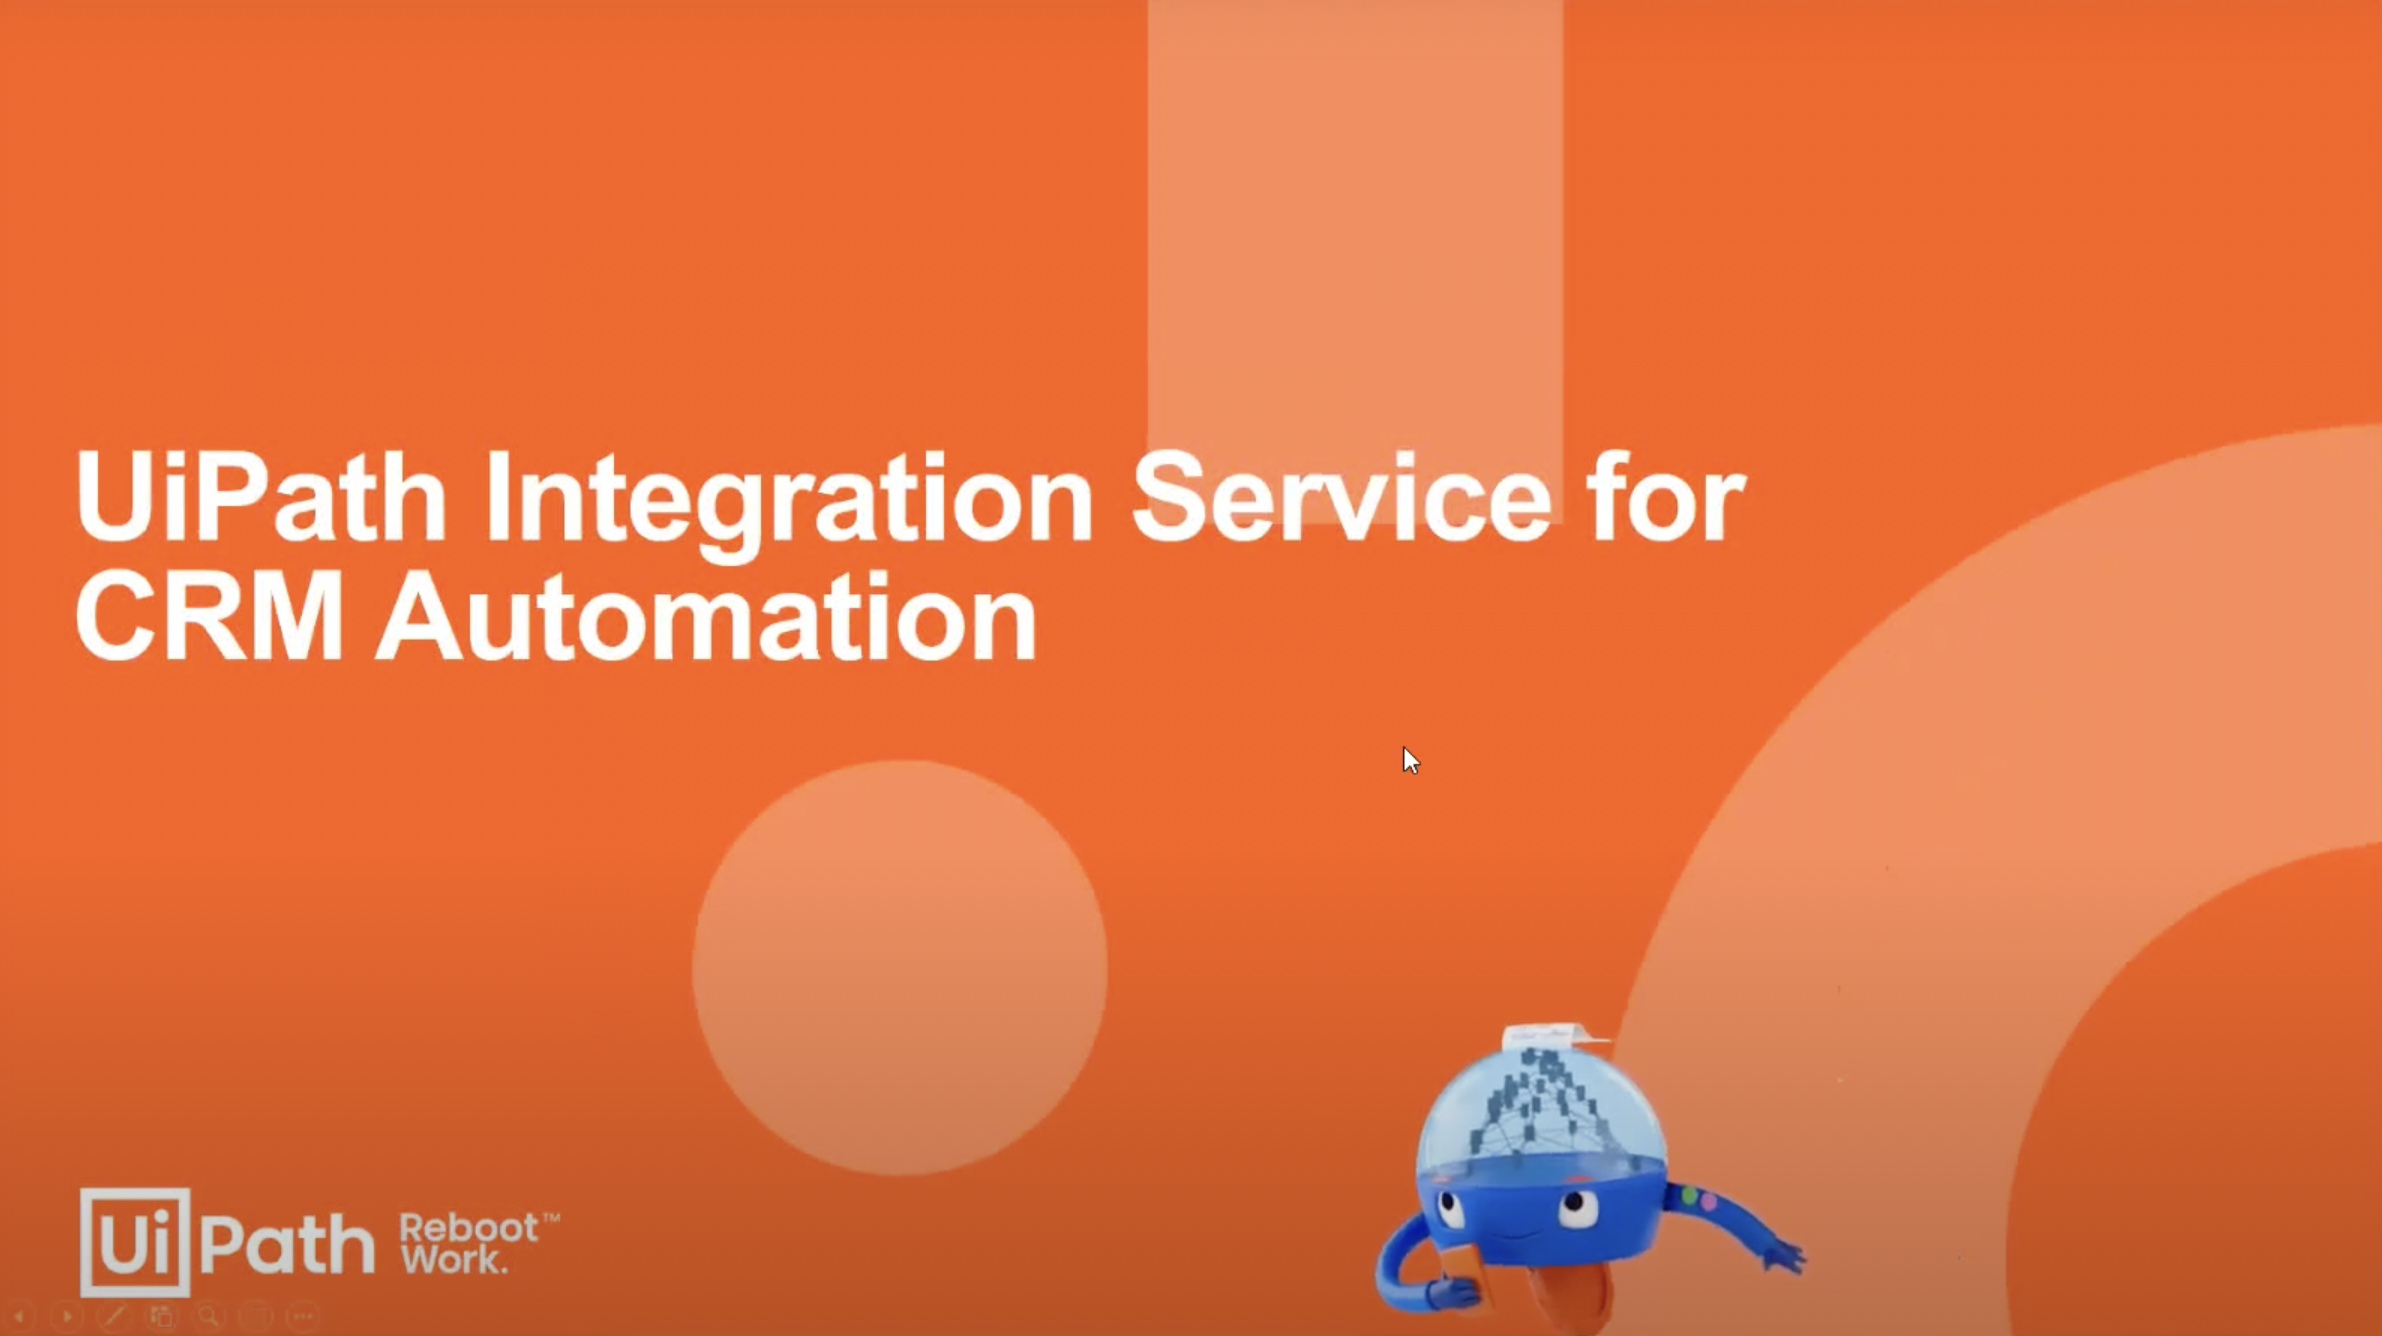 uipath integration service for crm automation